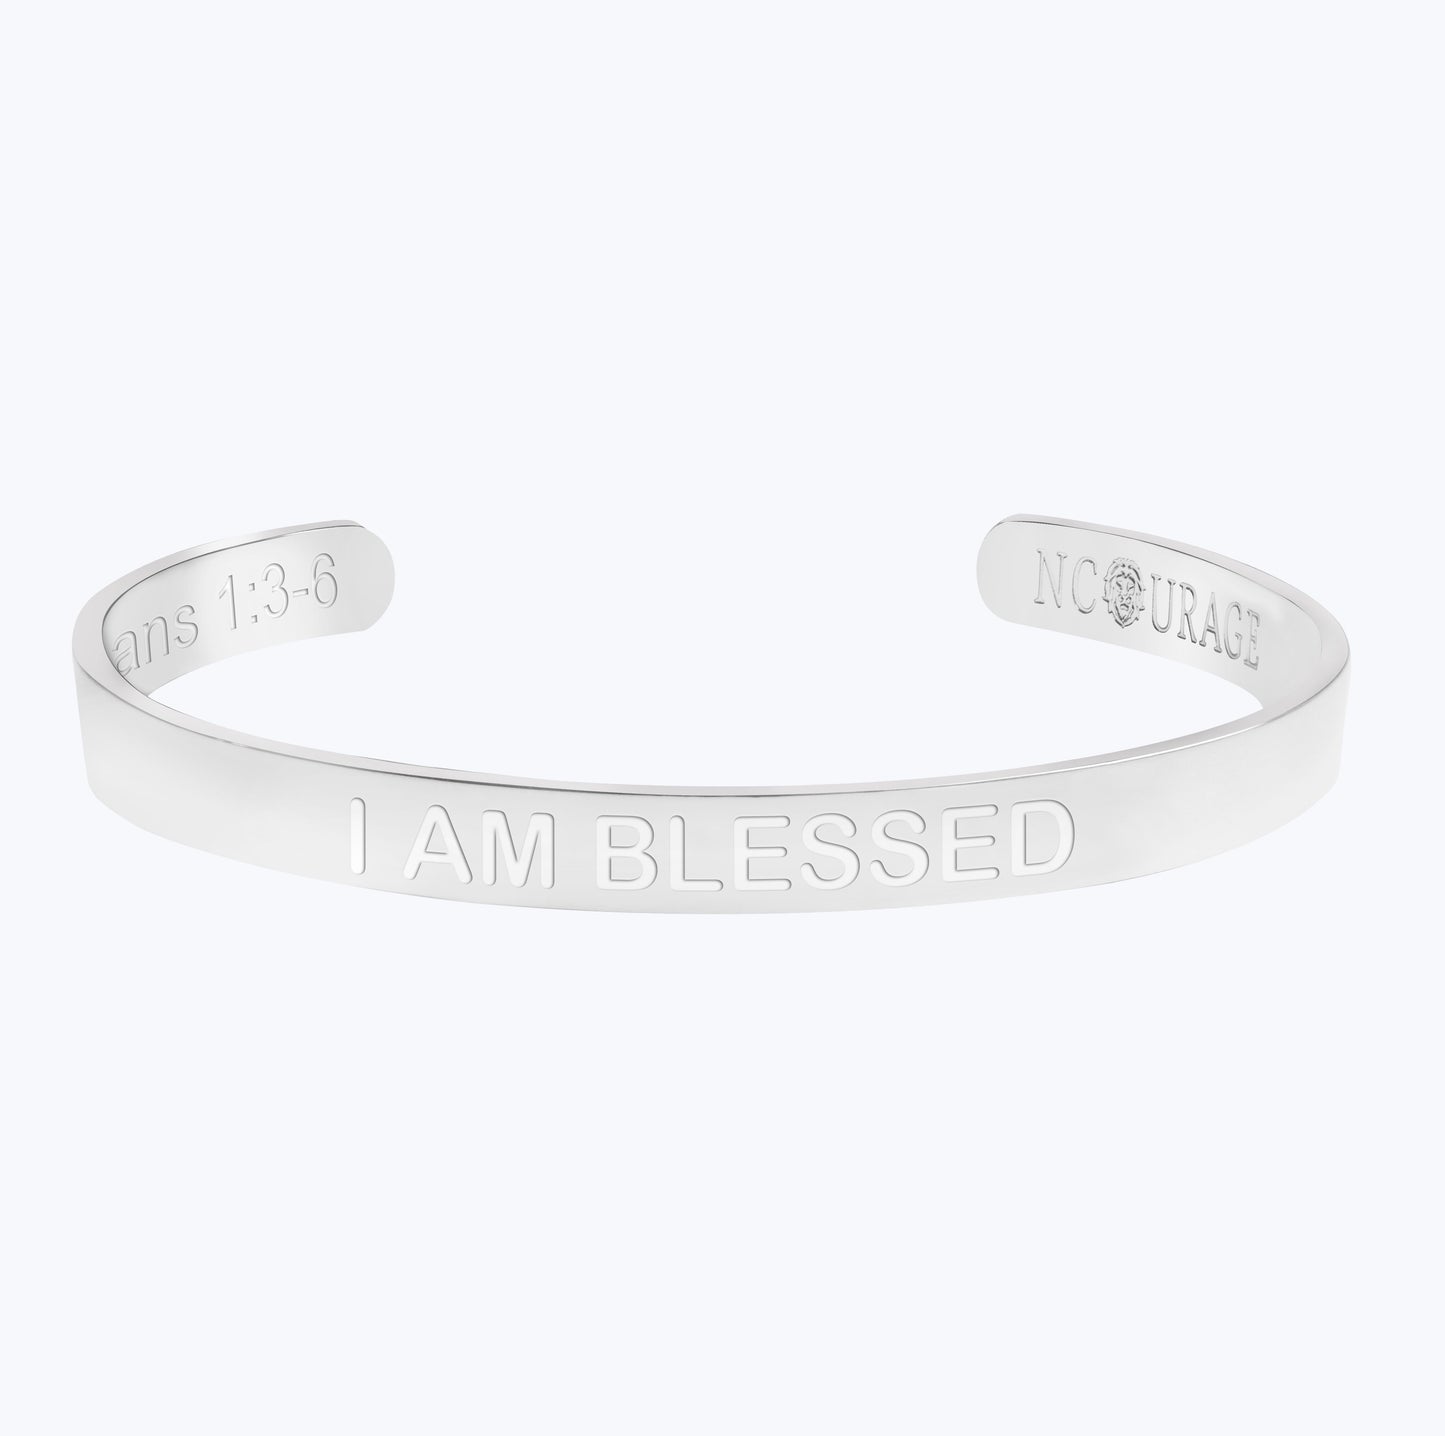 I AM BLESSED (7mm) - NCOURAGE Bands and Bracelets